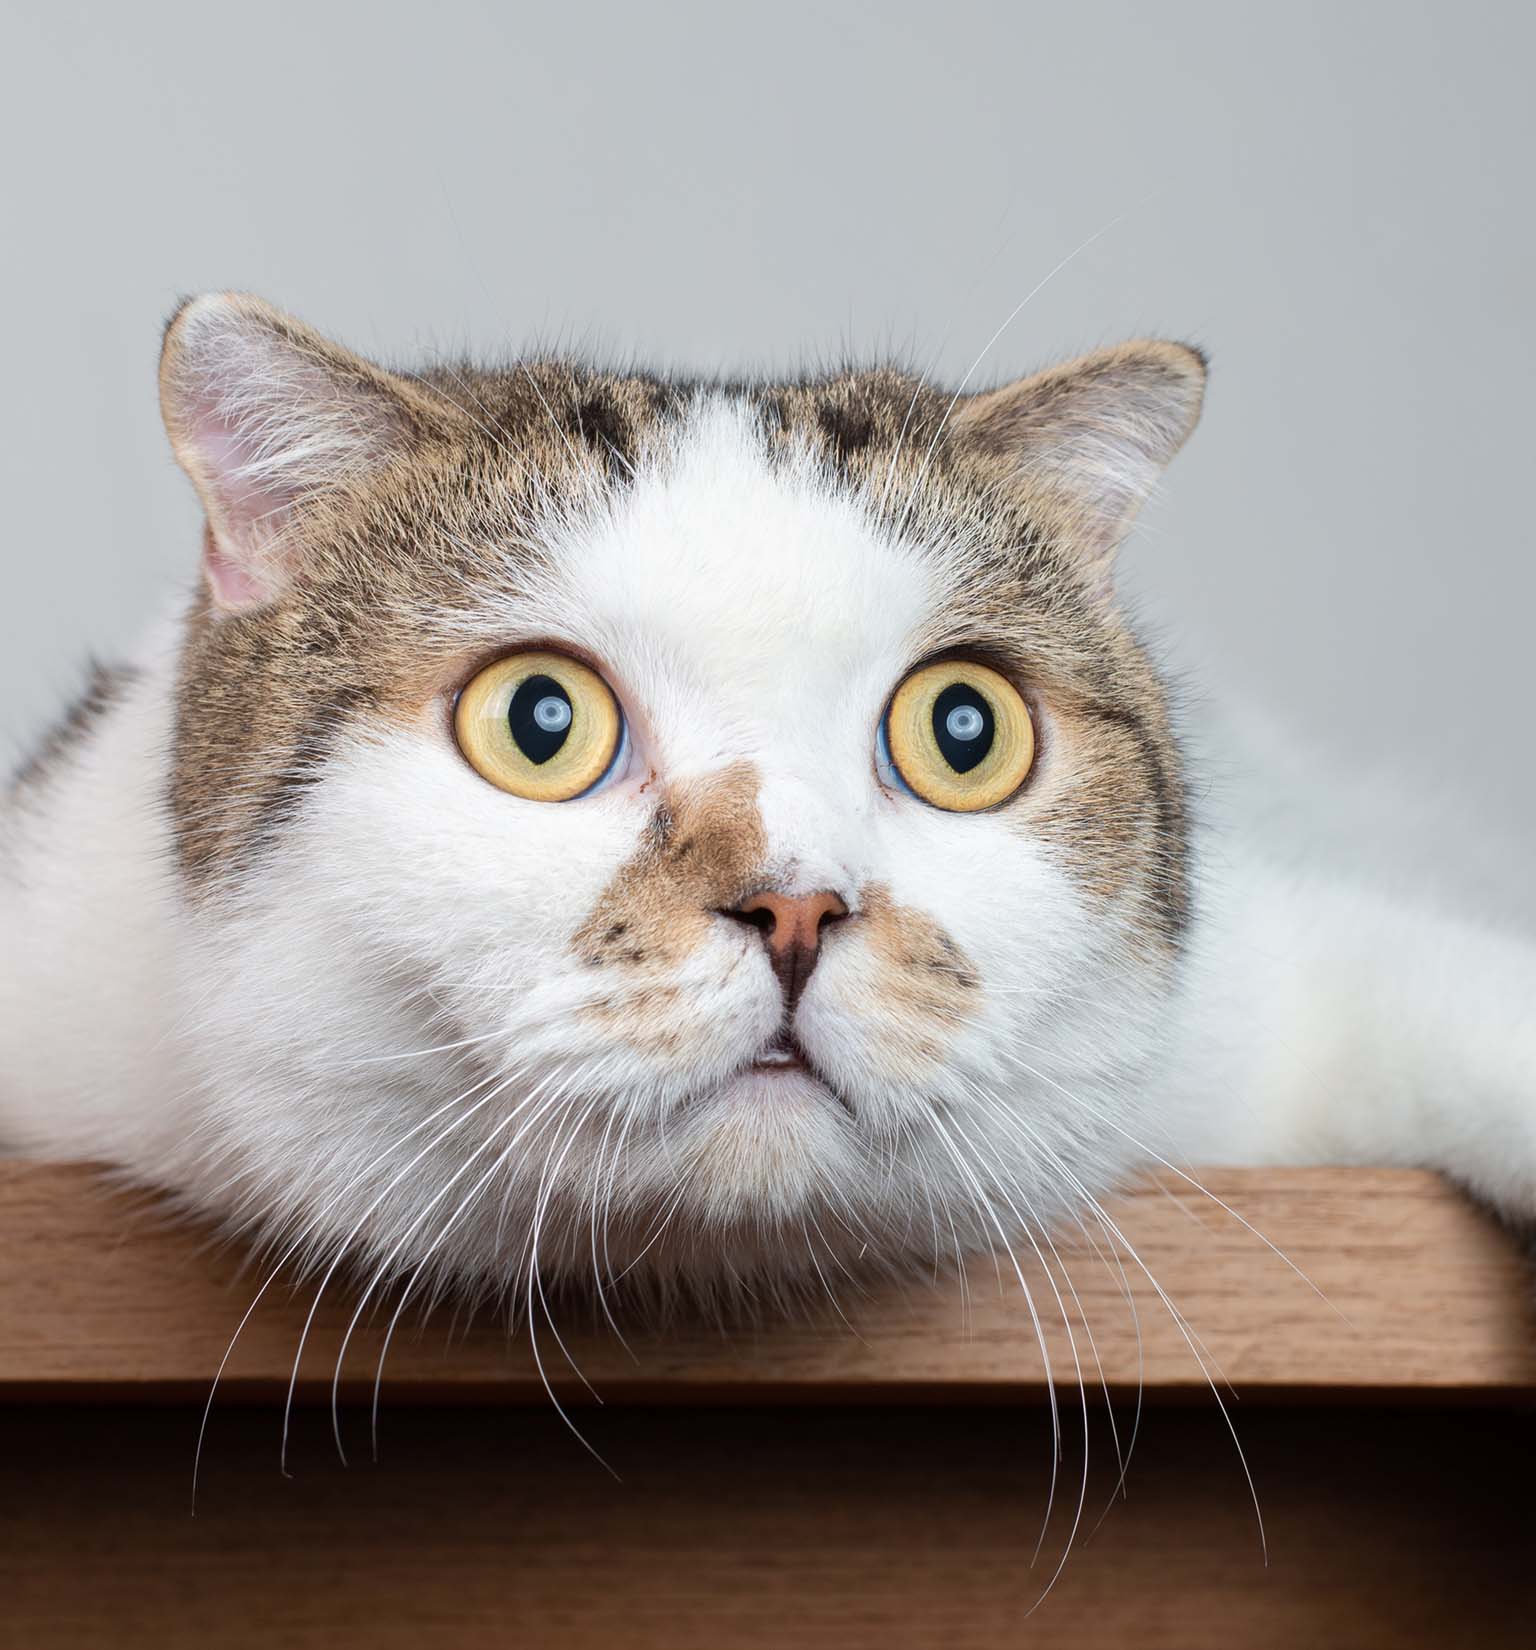 Discovered:
domestic cats have 276 different facial expressions